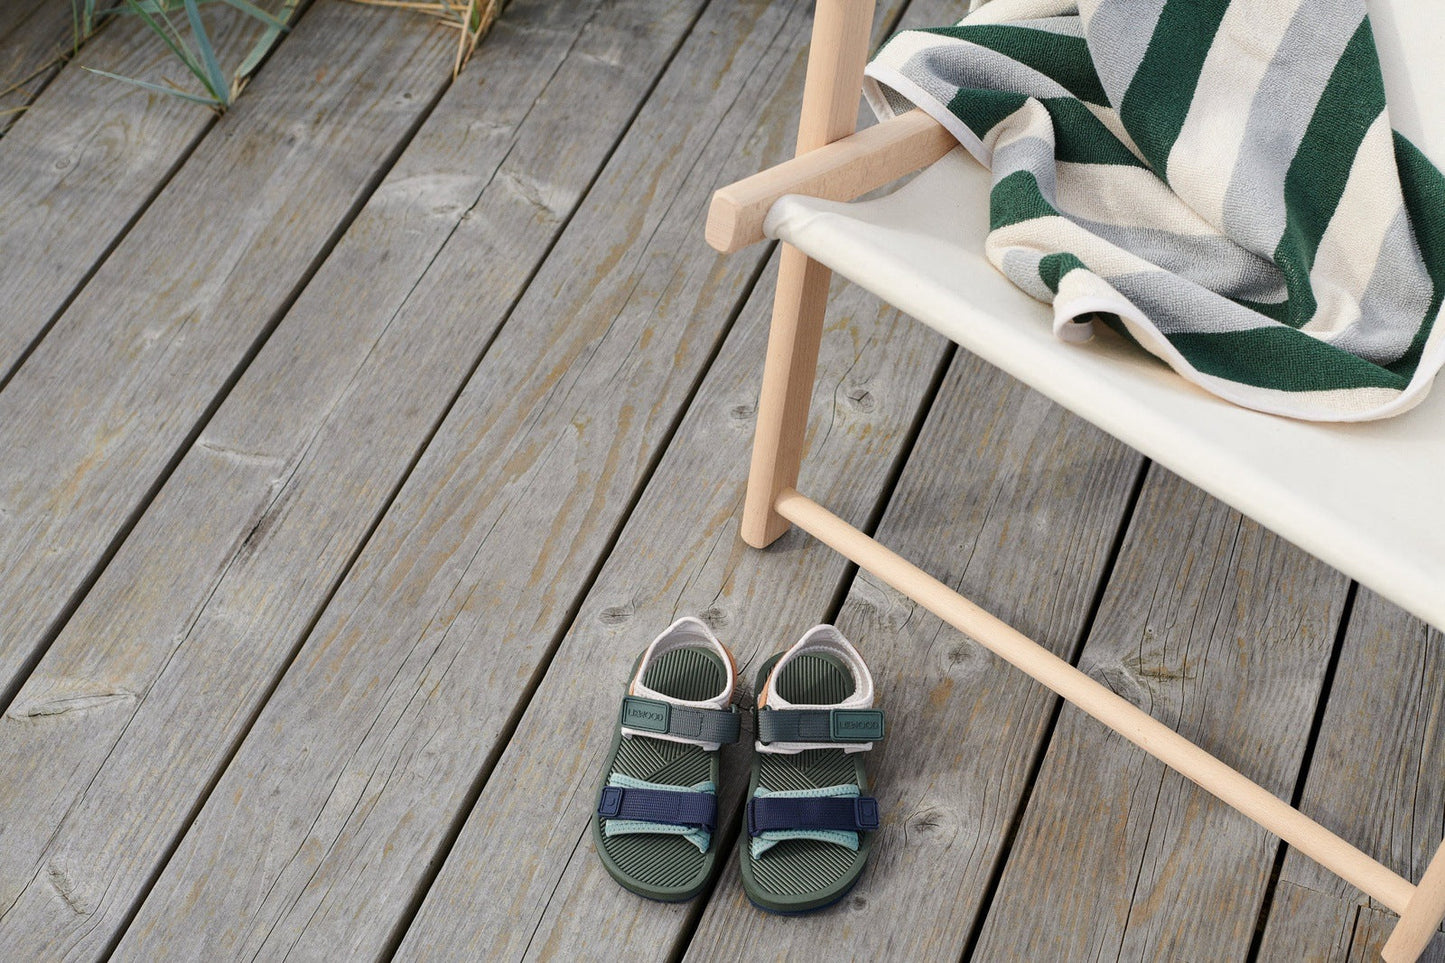 Load image into Gallery viewer, Liewood Monty Sandals, Liewood Monty, Liewood Monty Sandals Hunter Green Mix, Liewood Sandals, Beach Shoes, Summer Shoes, Liewood Stockist, Independent Nottinghamshire Children’s Store
